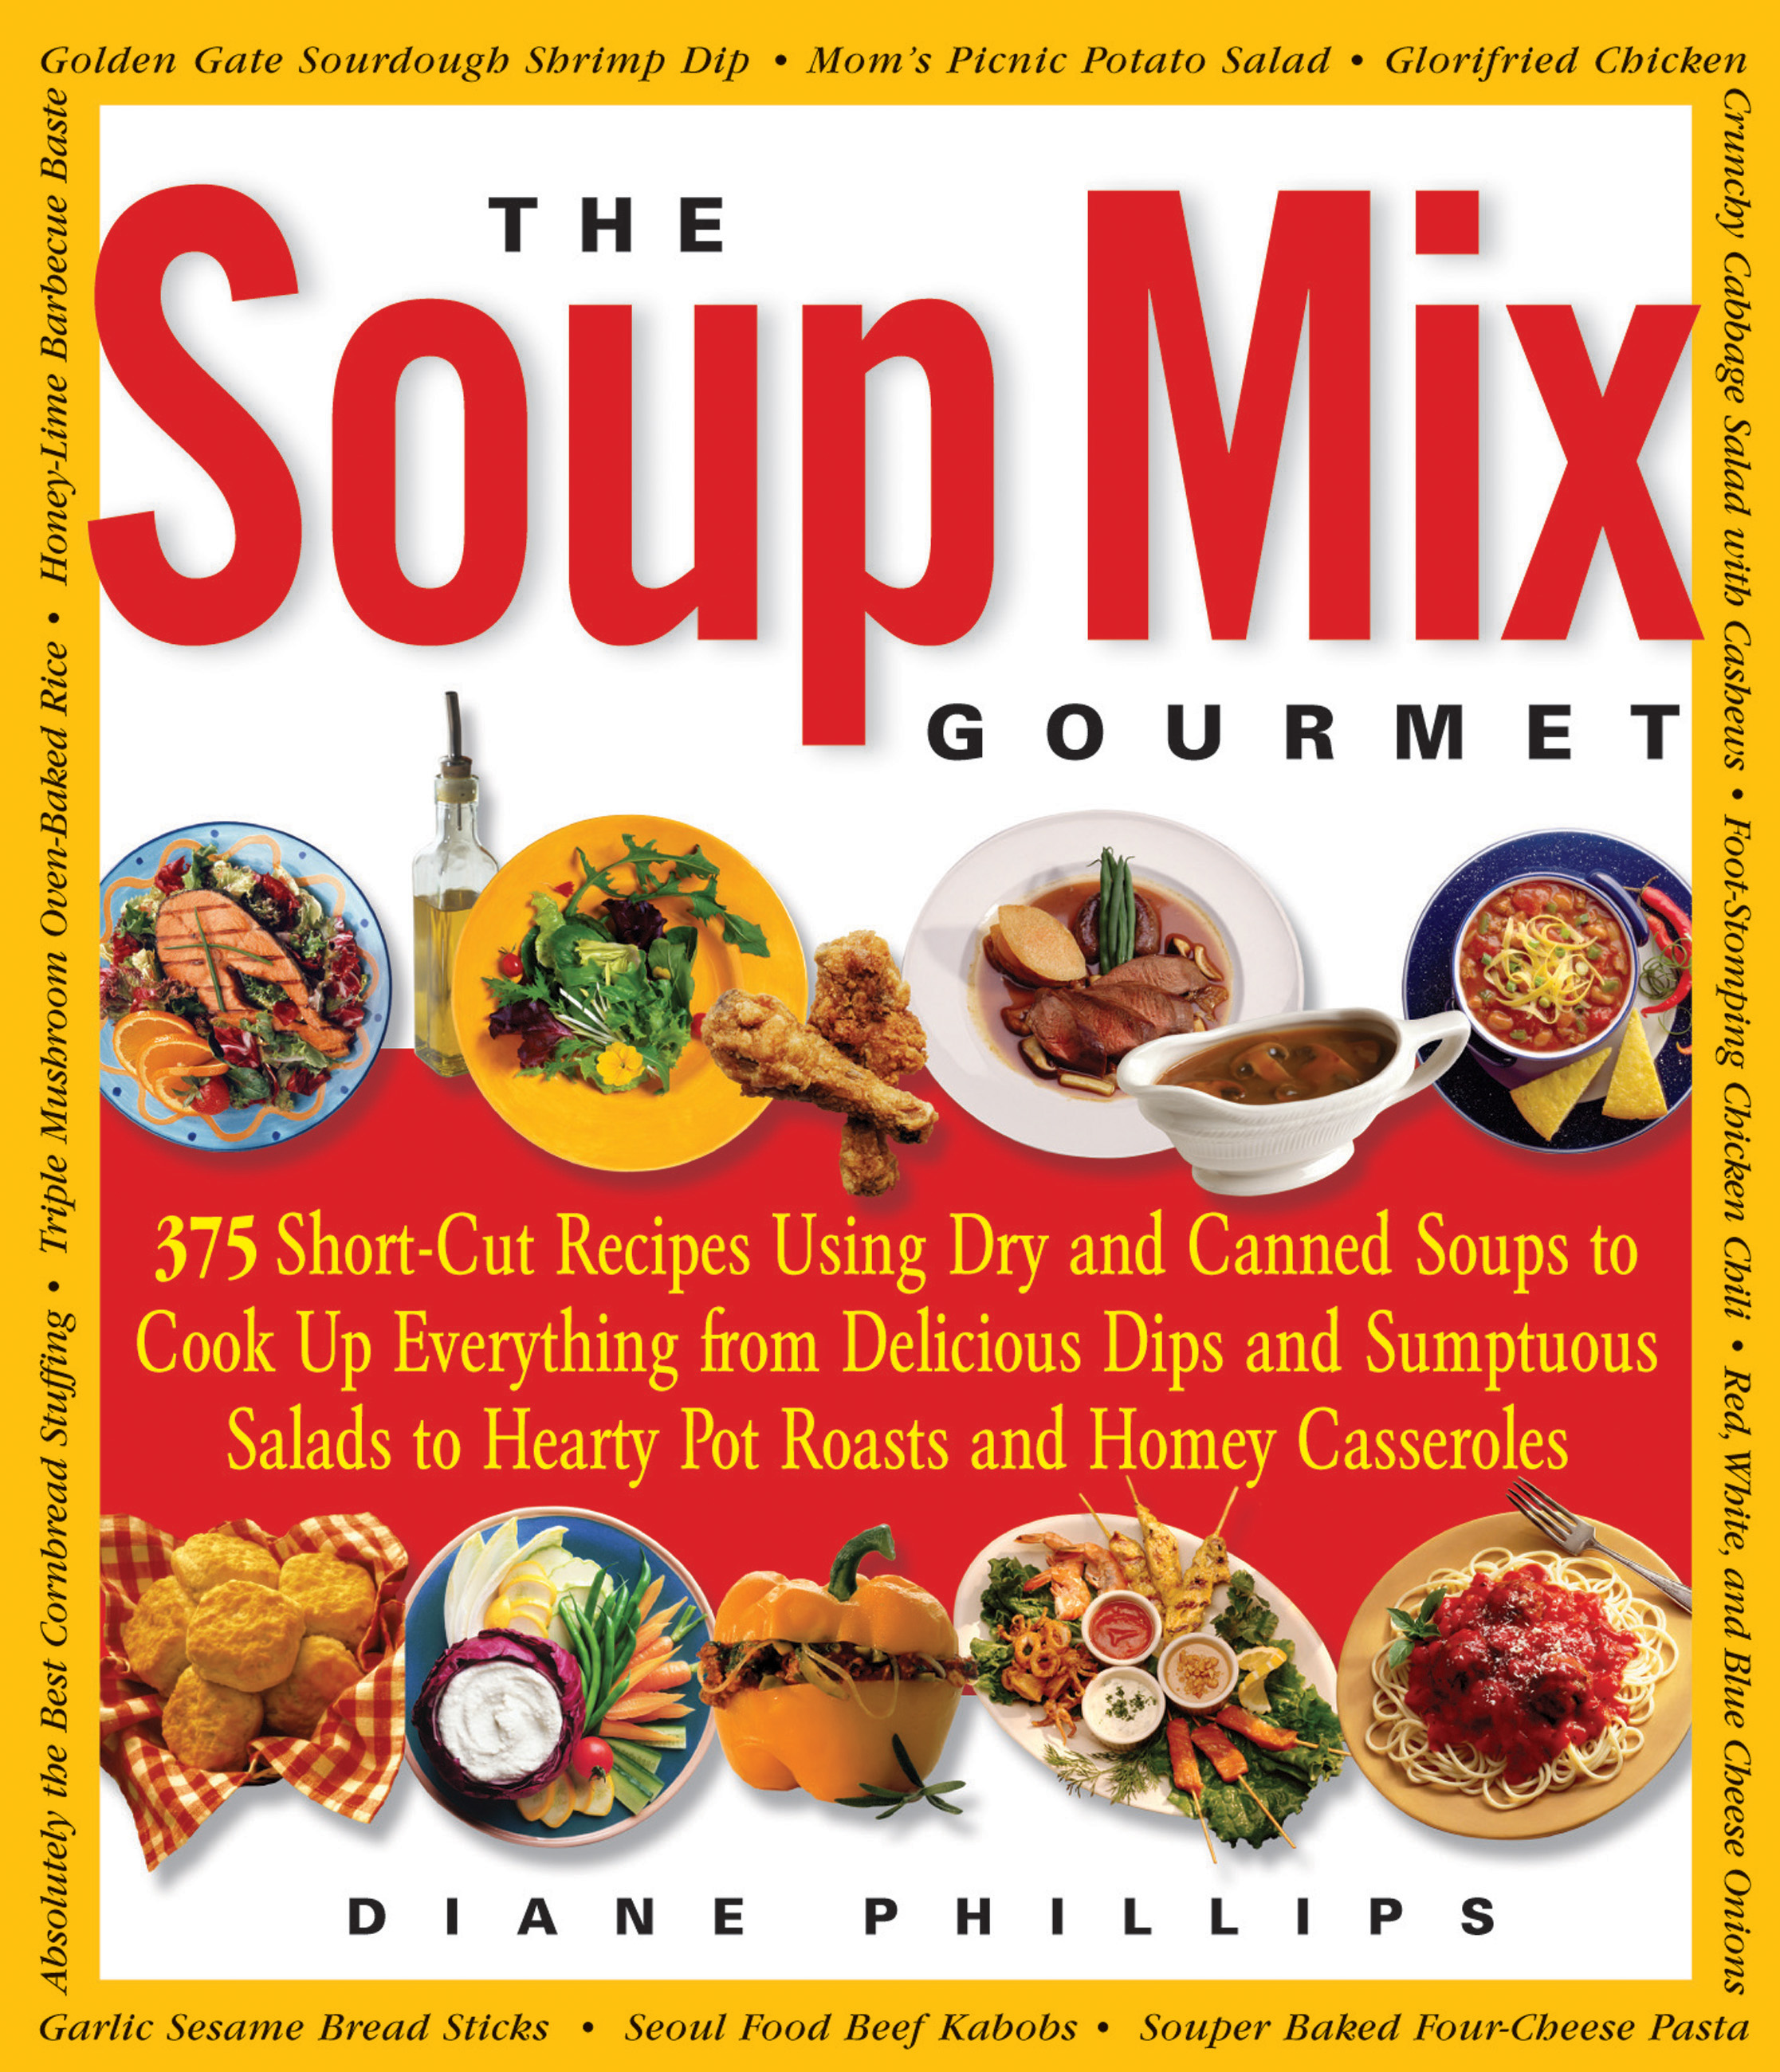 Umschlagbild für The Soup Mix Gourmet [electronic resource] : 375 Short-Cut Recipes Using Dry and Canned Soups to Cook Up Everything from Delicious Dips and Sumptuous Salads to Hearty Pot Roasts and Homey Casseroles